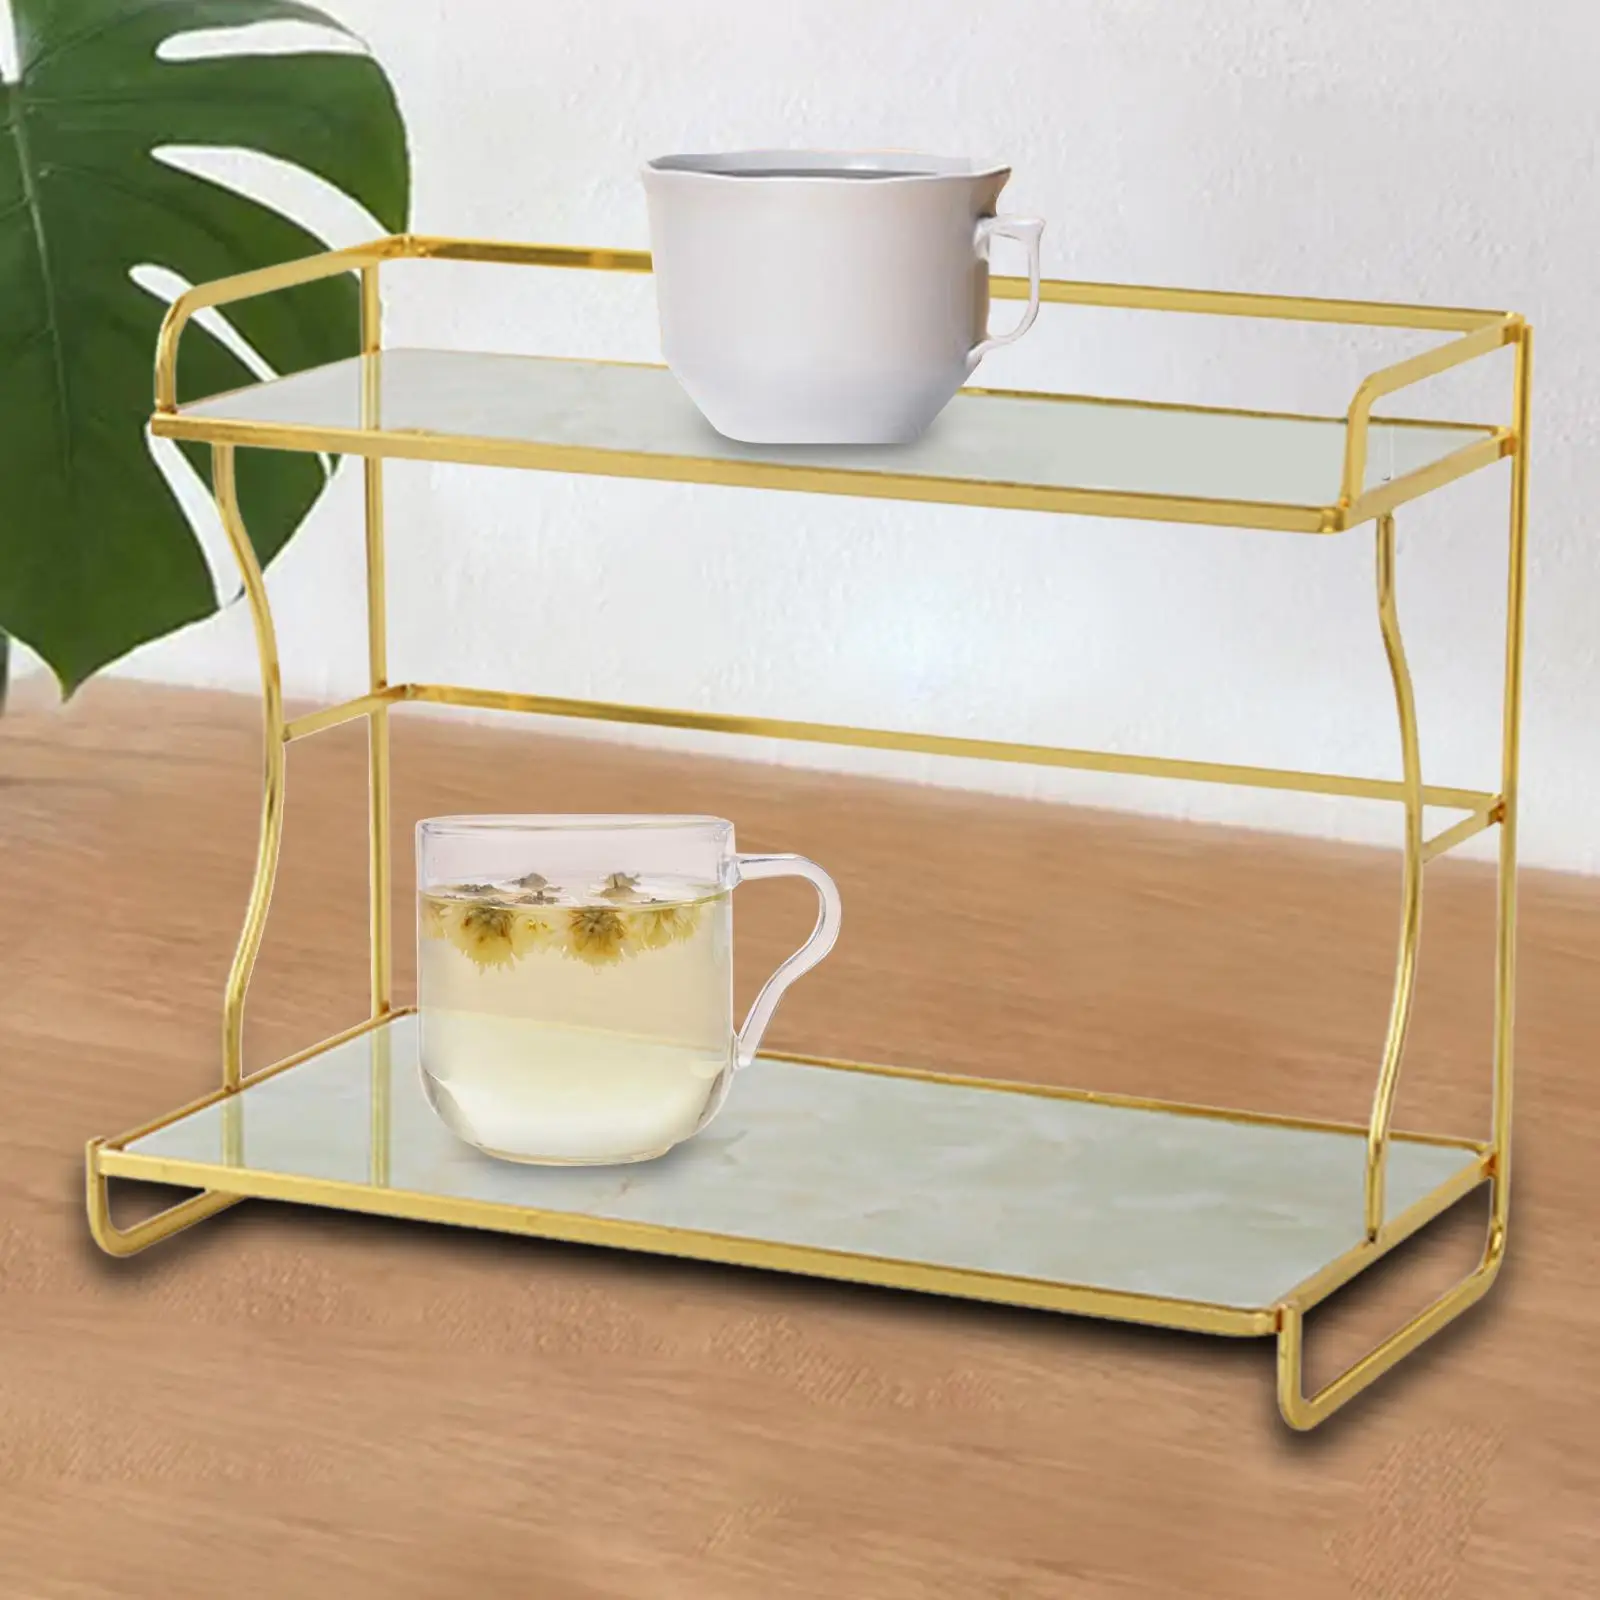 2 Tier Tea Cup Coffee Cup Rack Tray Tea Party Serving Platter for Dinner Parties Stylish Kitchen Spice Rack Makeup Organizer